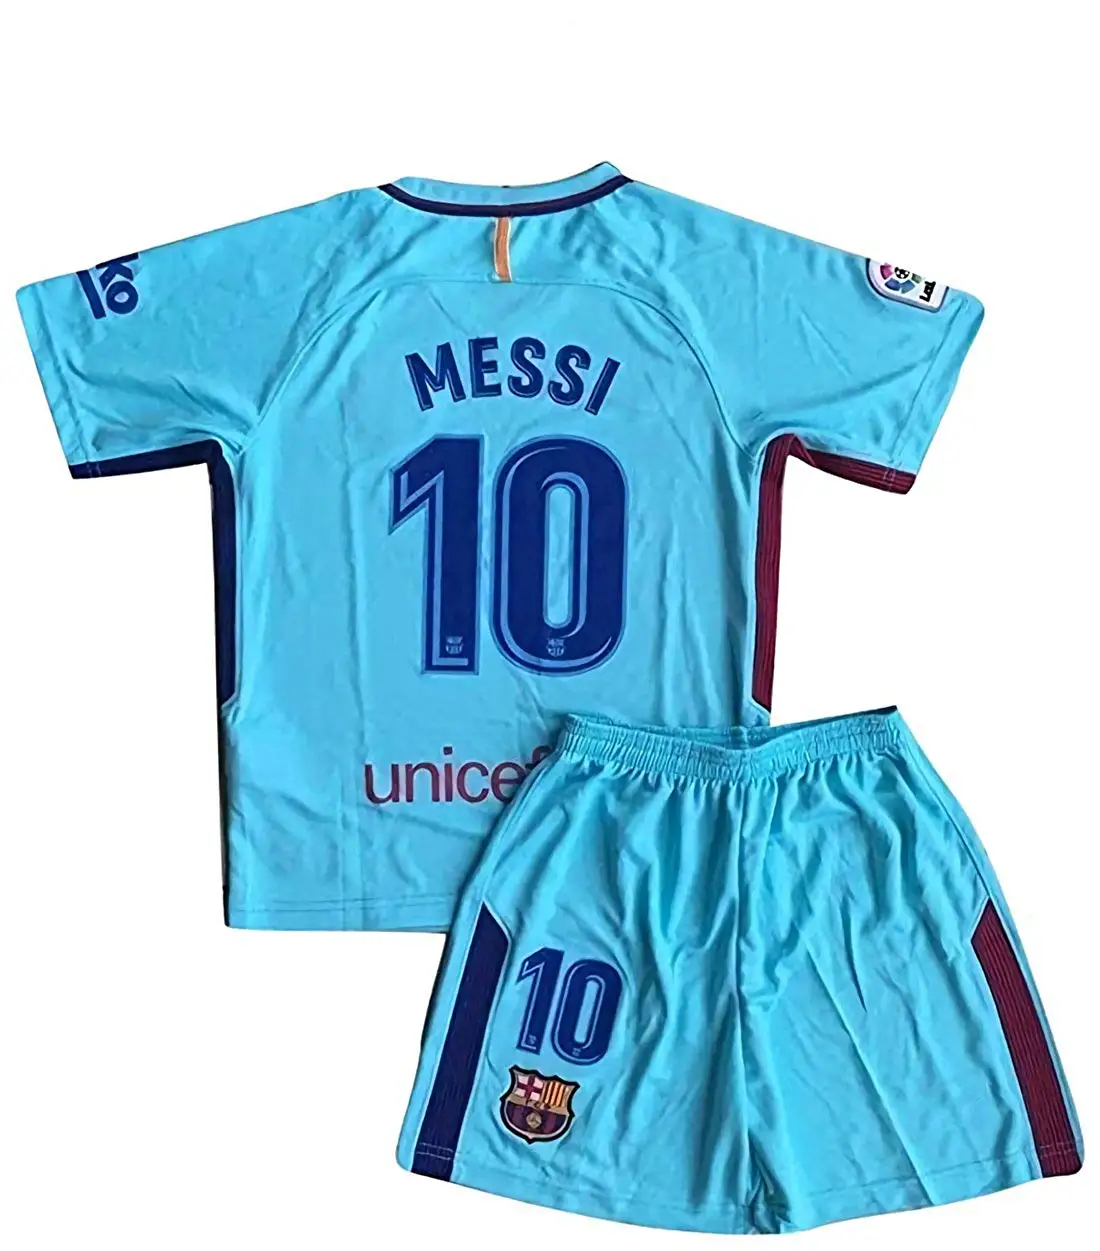 messi jersey and shorts